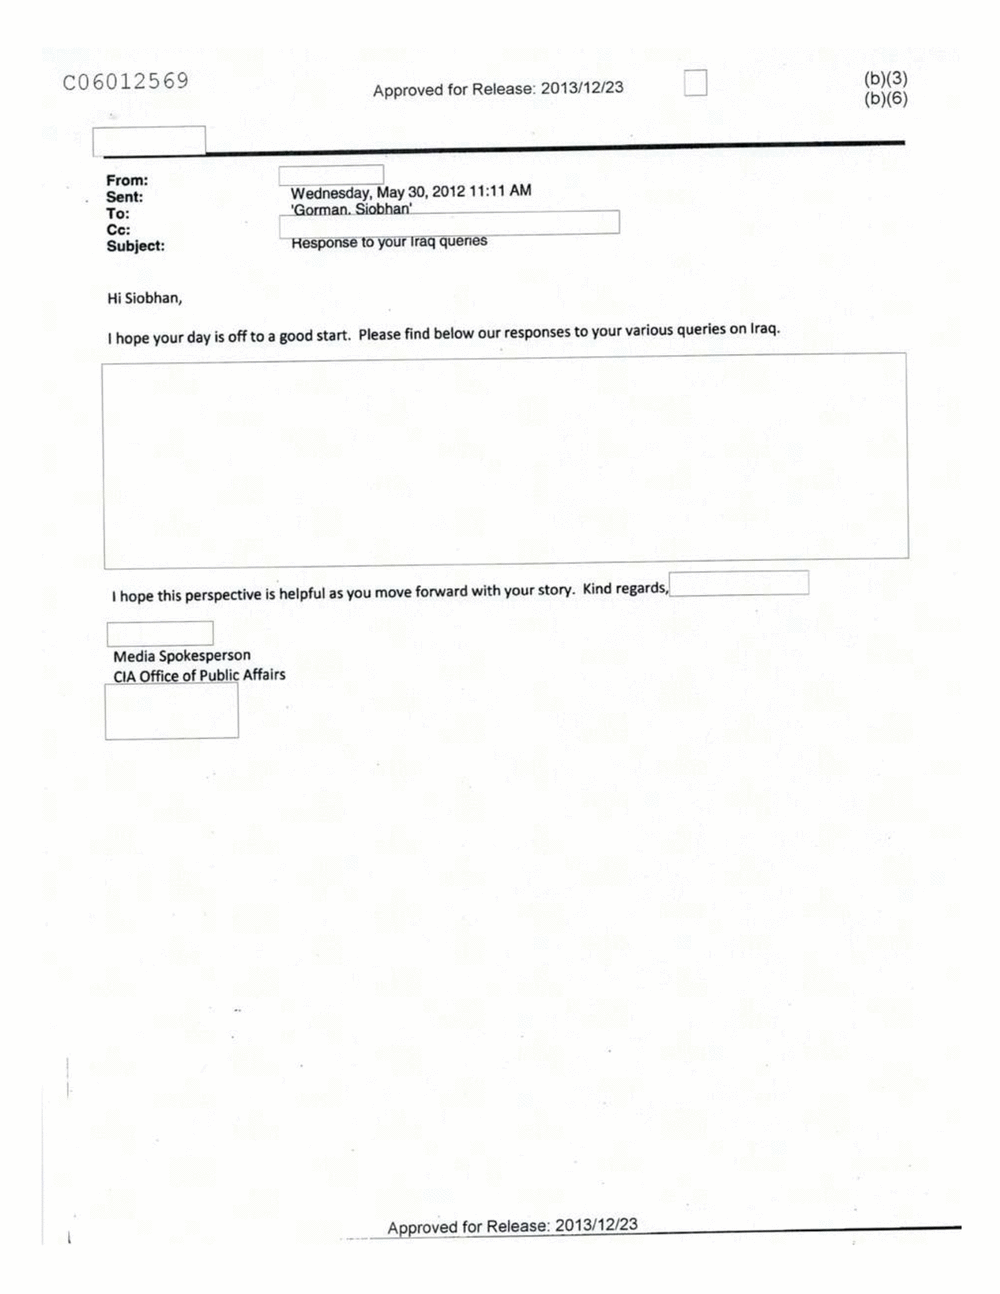 Page 102 from Email Correspondence Between Reporters and CIA Flacks